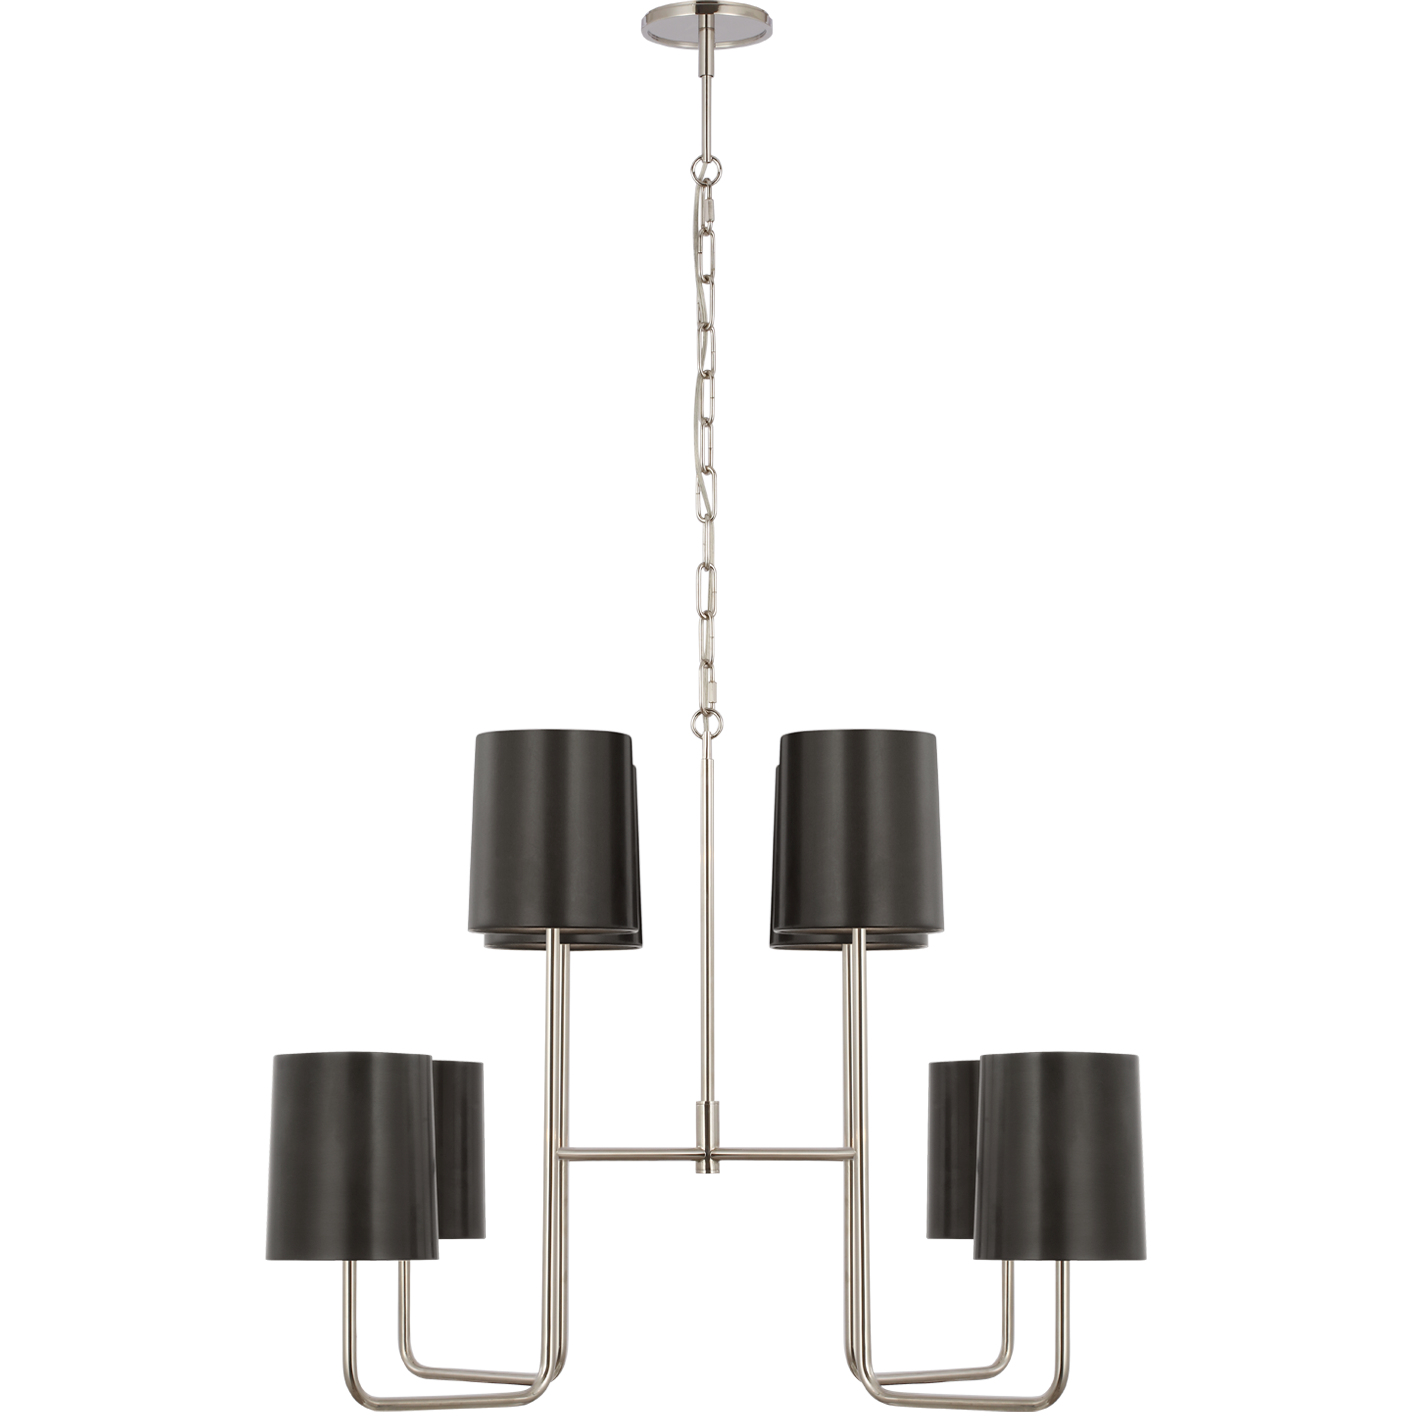 Go Lightly Extra Large Two Tier Chandelier